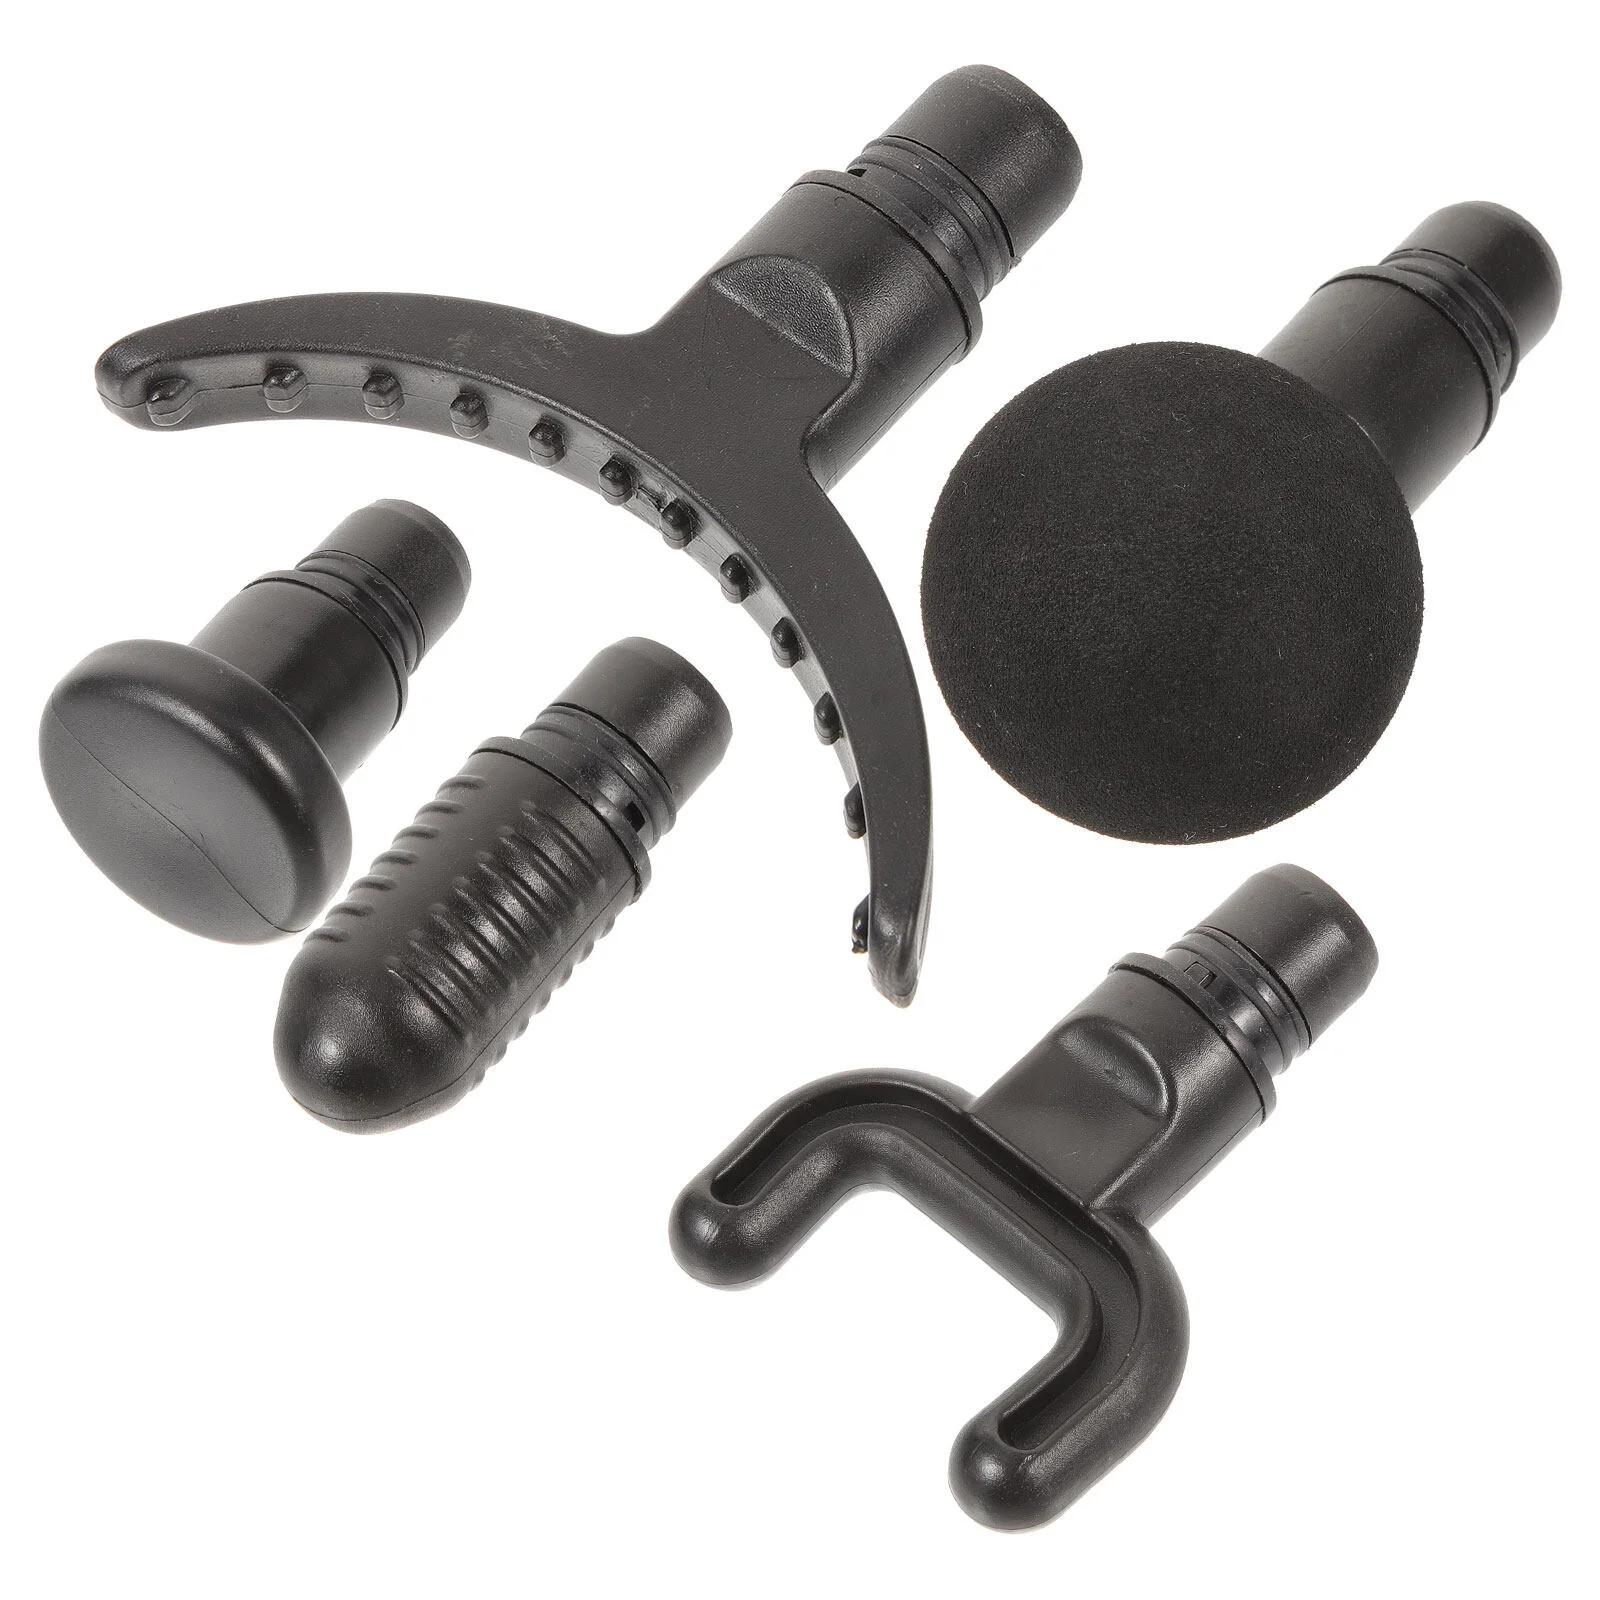 

5 Pcs Body Attachment Adapter Relax Tools Fascia Ball Portable Head Plastic Fitness Gym